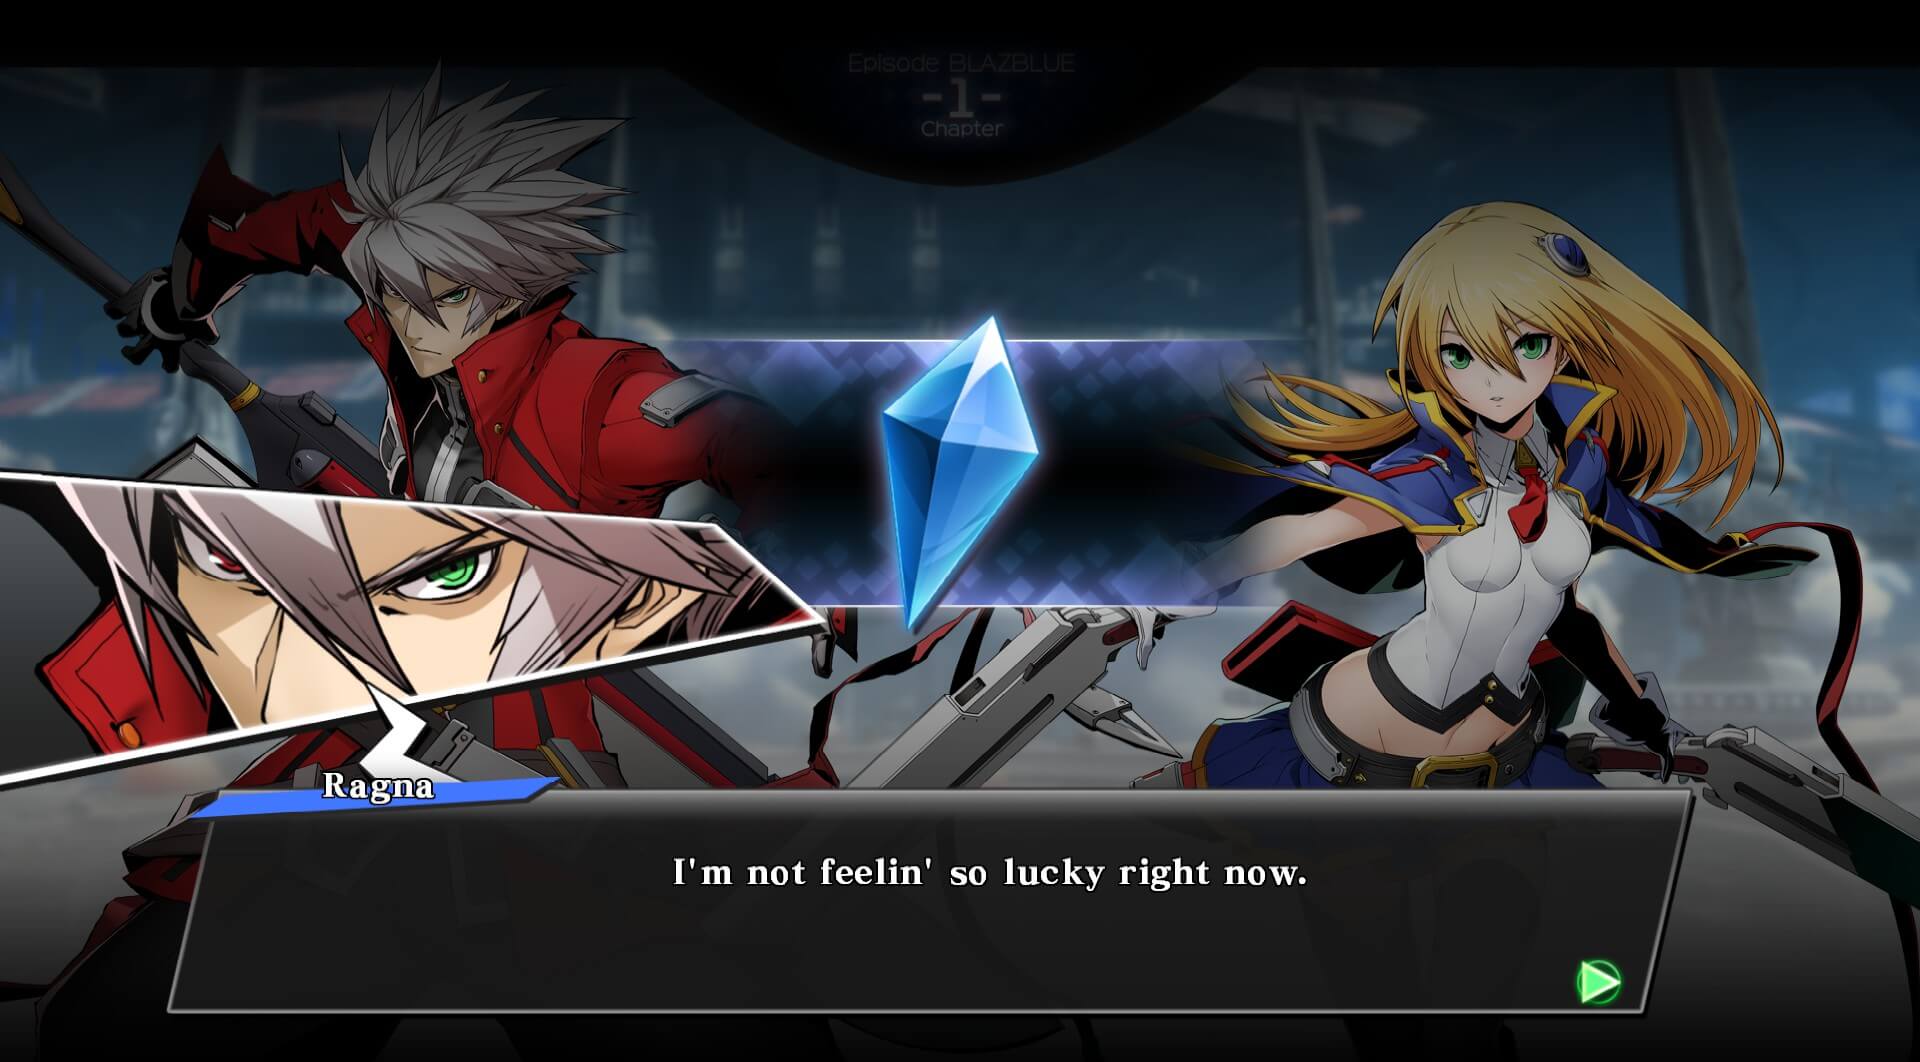 Ragna saying "I'm not feelin' so lucky right now" in BlazBlue: Cross Tag Battle